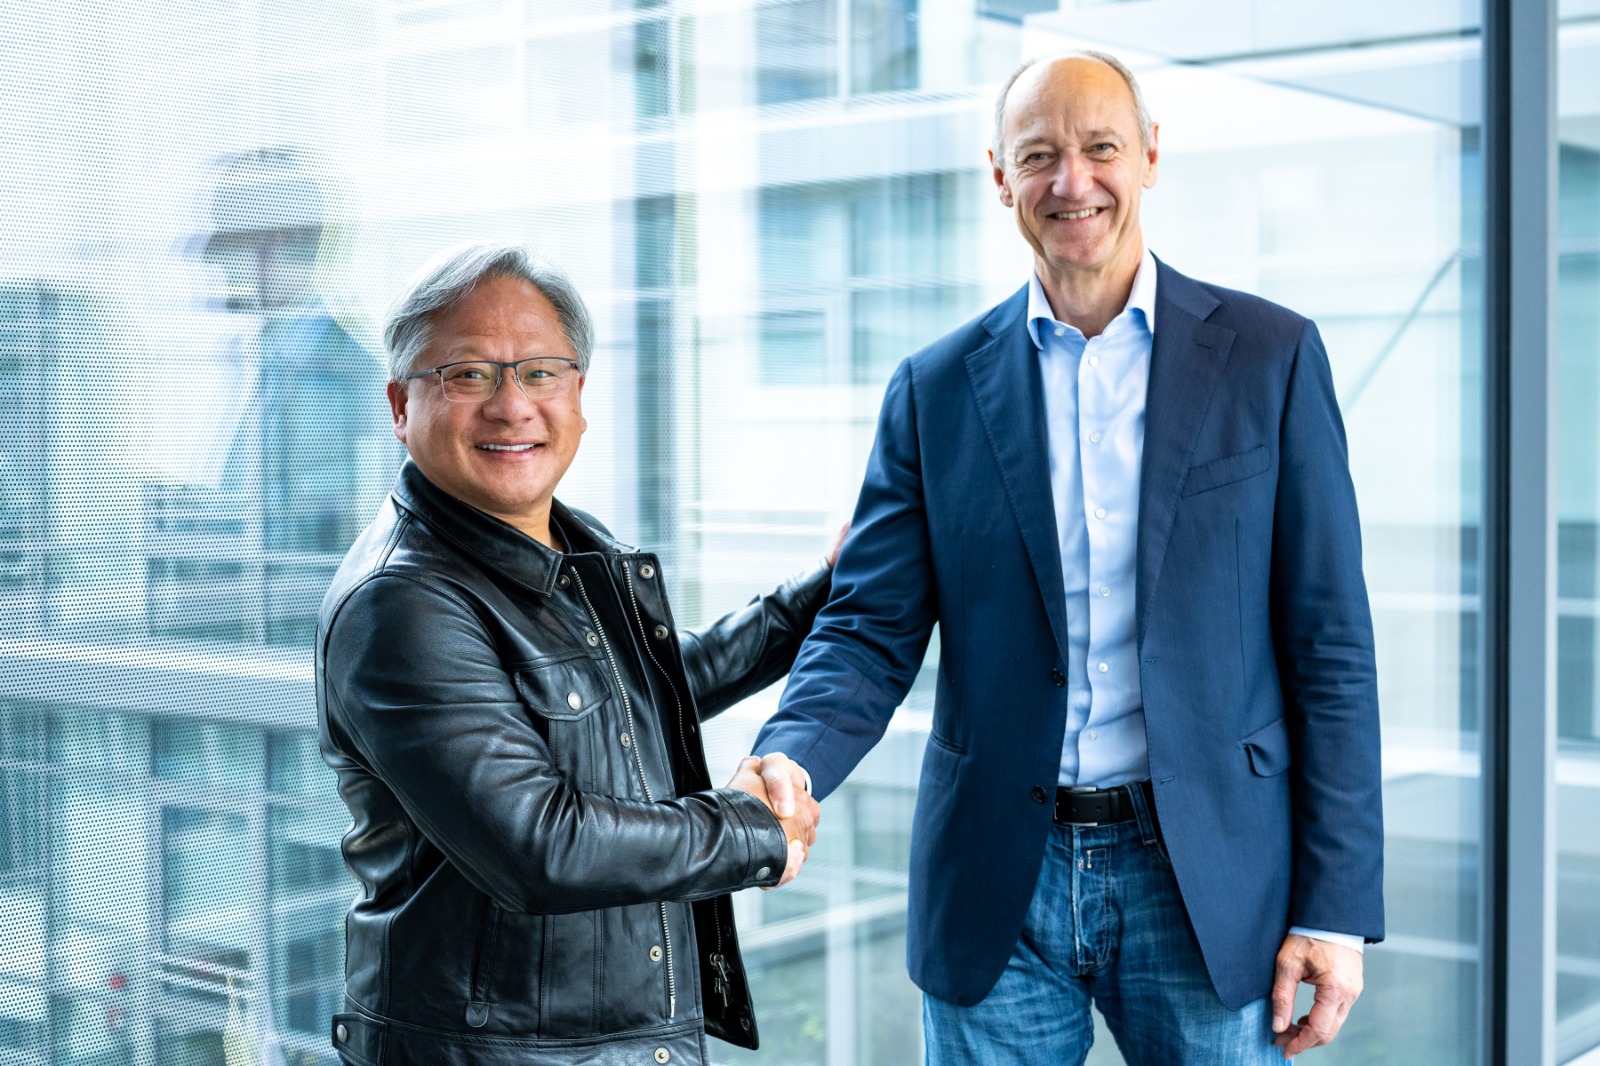 NVIDIA Founder and CEO Jensen Huang shakes Siemens CEO Roland Busch's hand as they discuss digital twin technology.